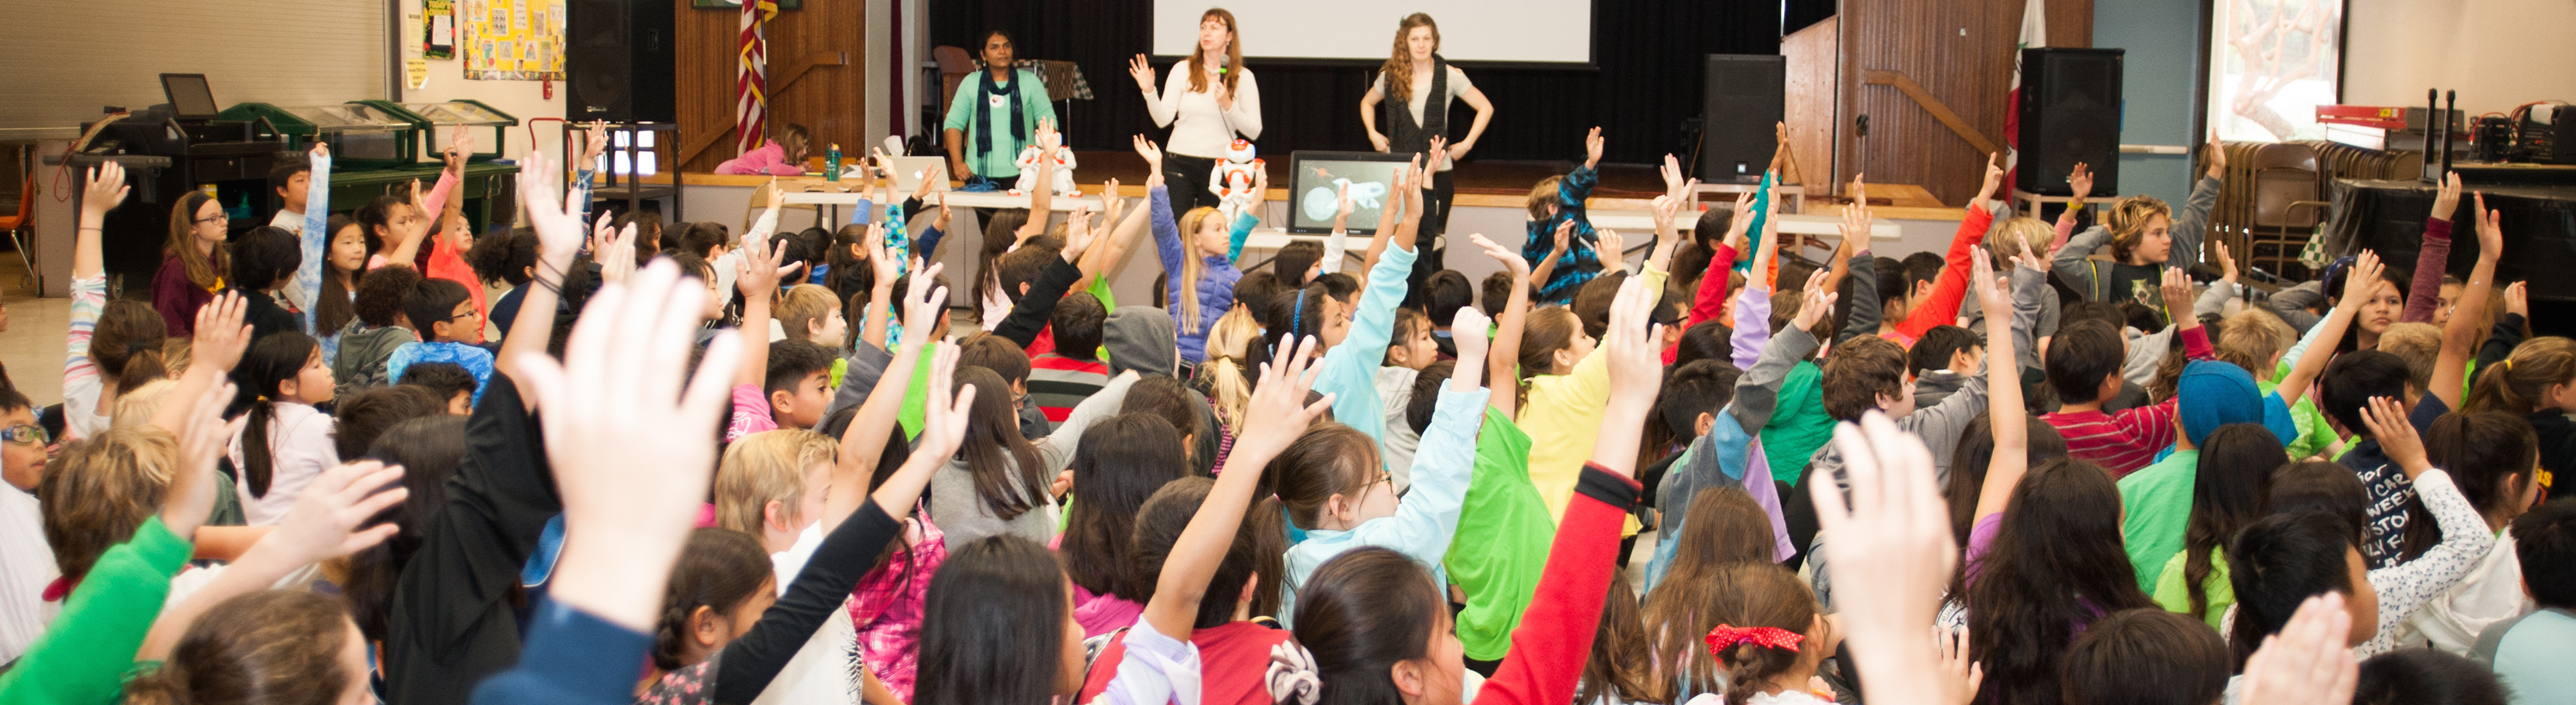 Assembly at Monterey Hills Elementary School